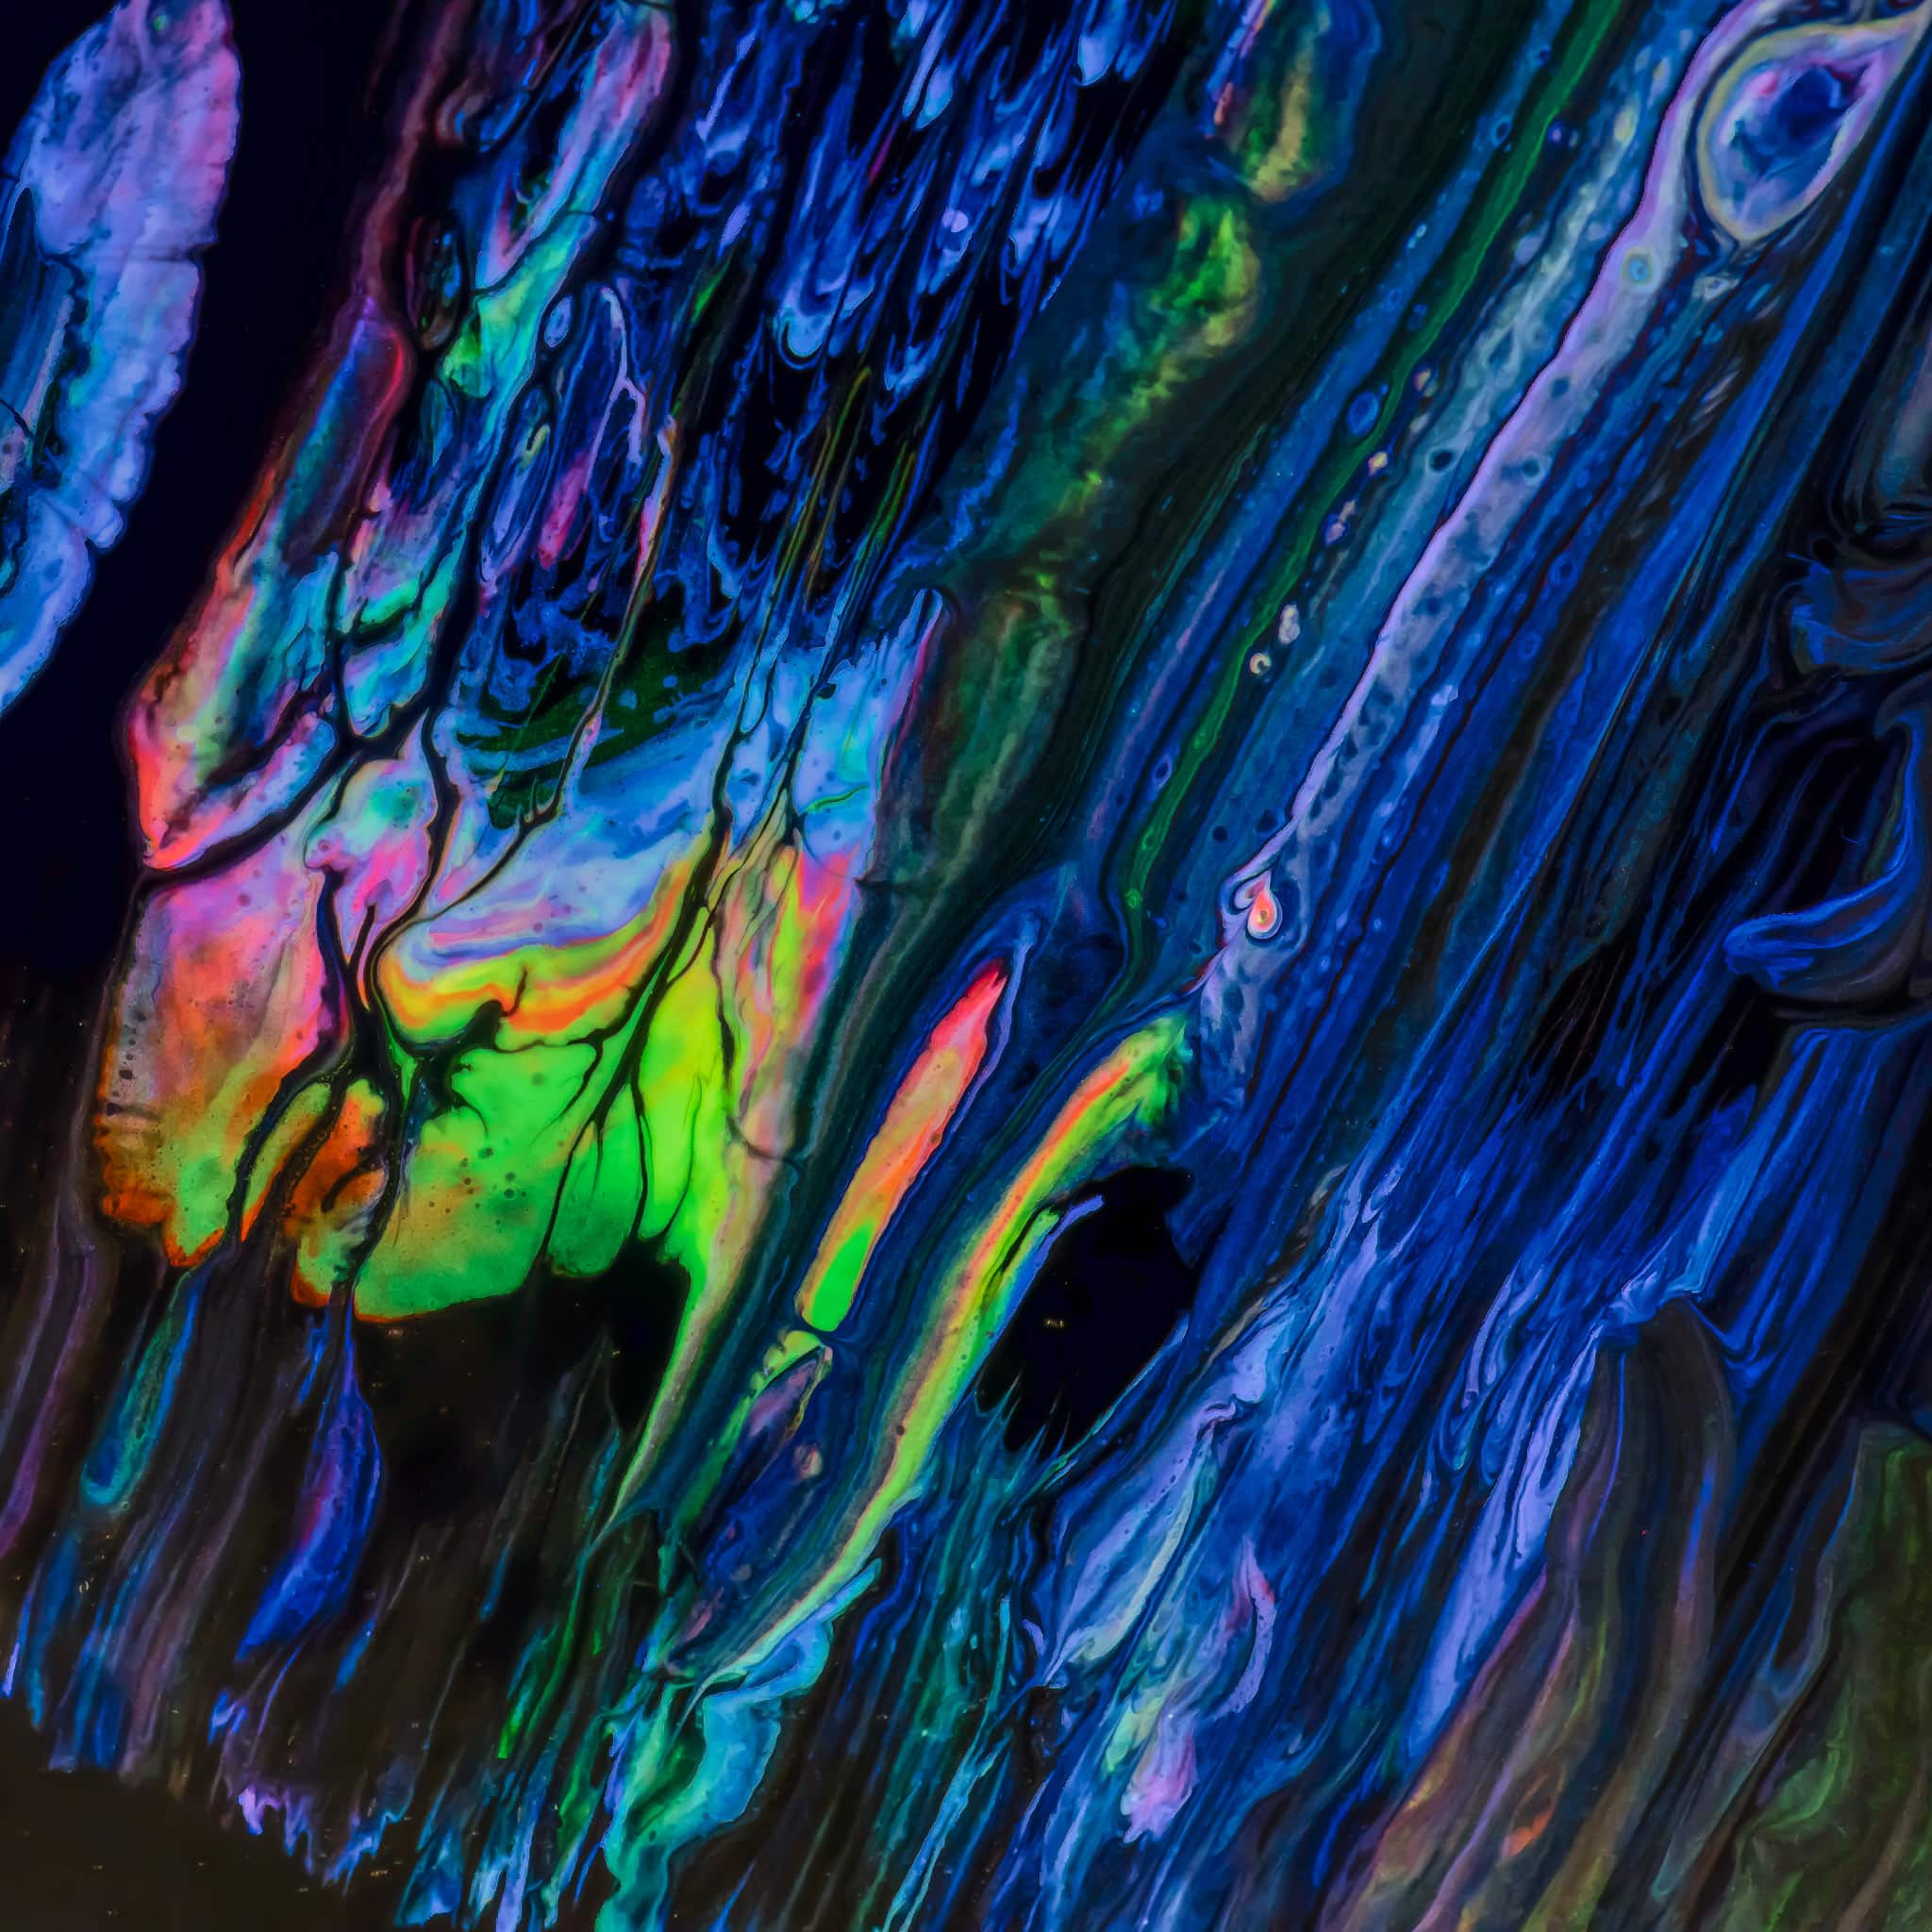 Swirling Paint Abstracts | William Horton Photography